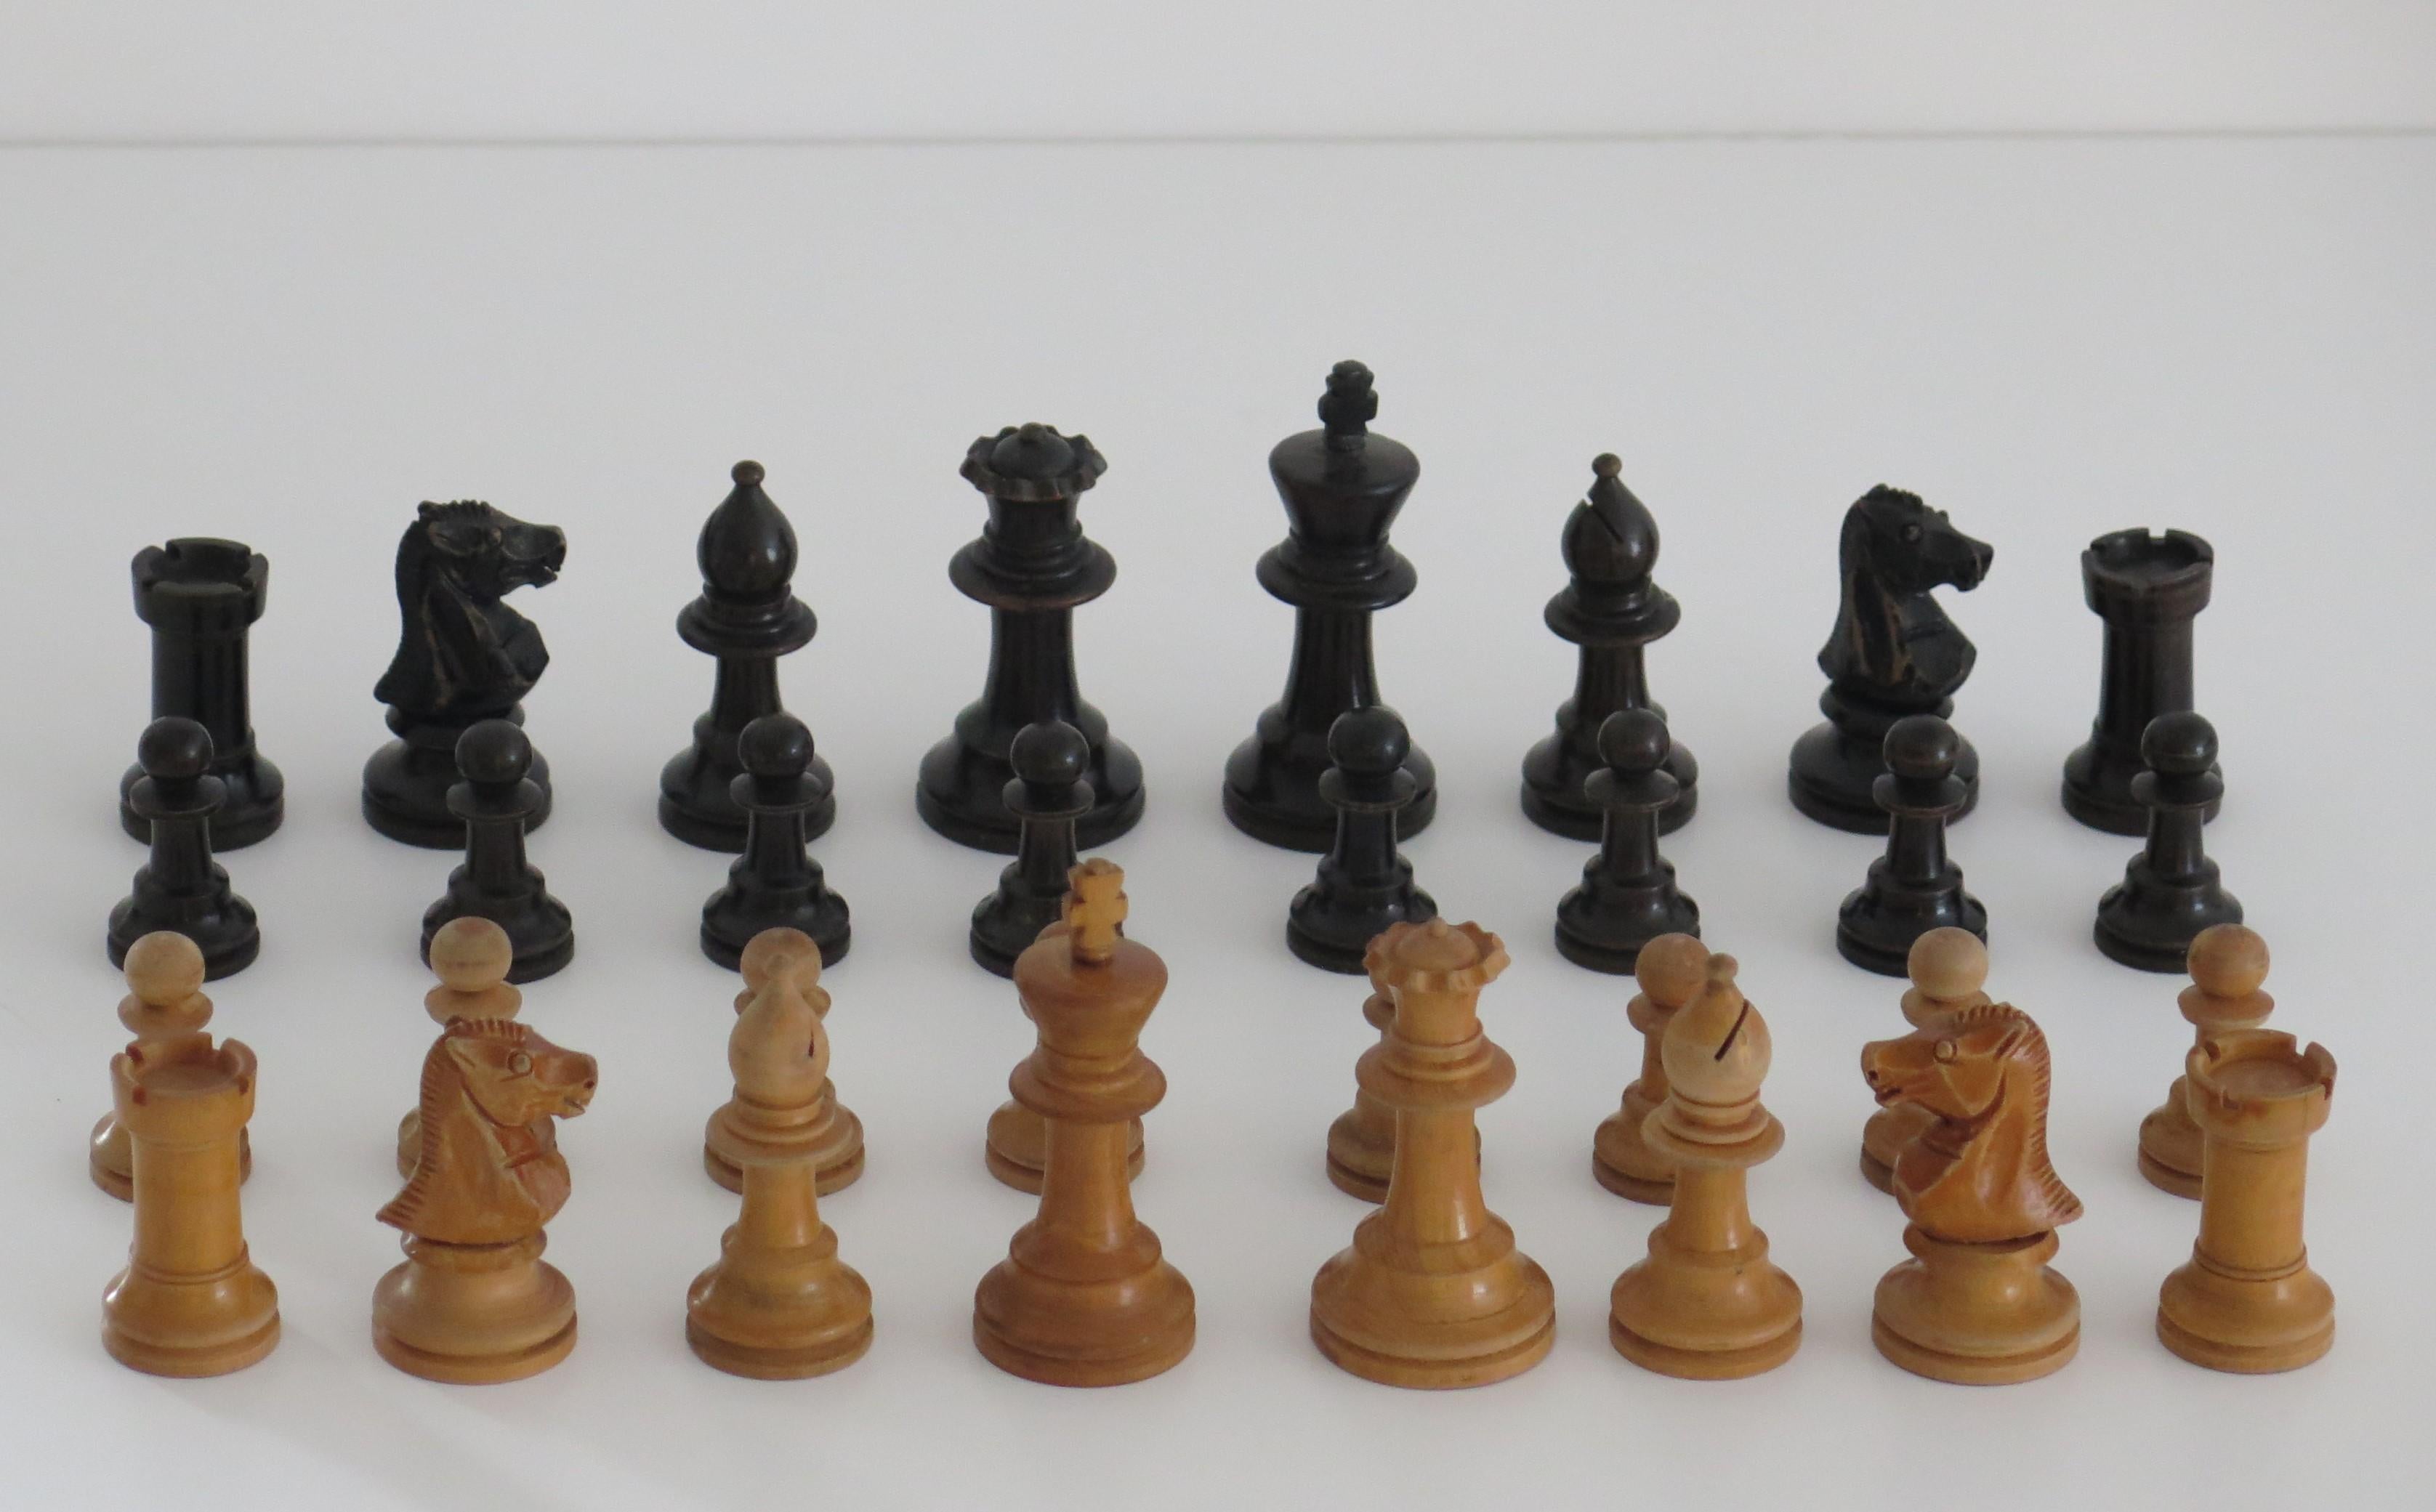 Victorian Staunton Fierce Knight Weighted Chess Set Kings in Jointed Box, 19th Century